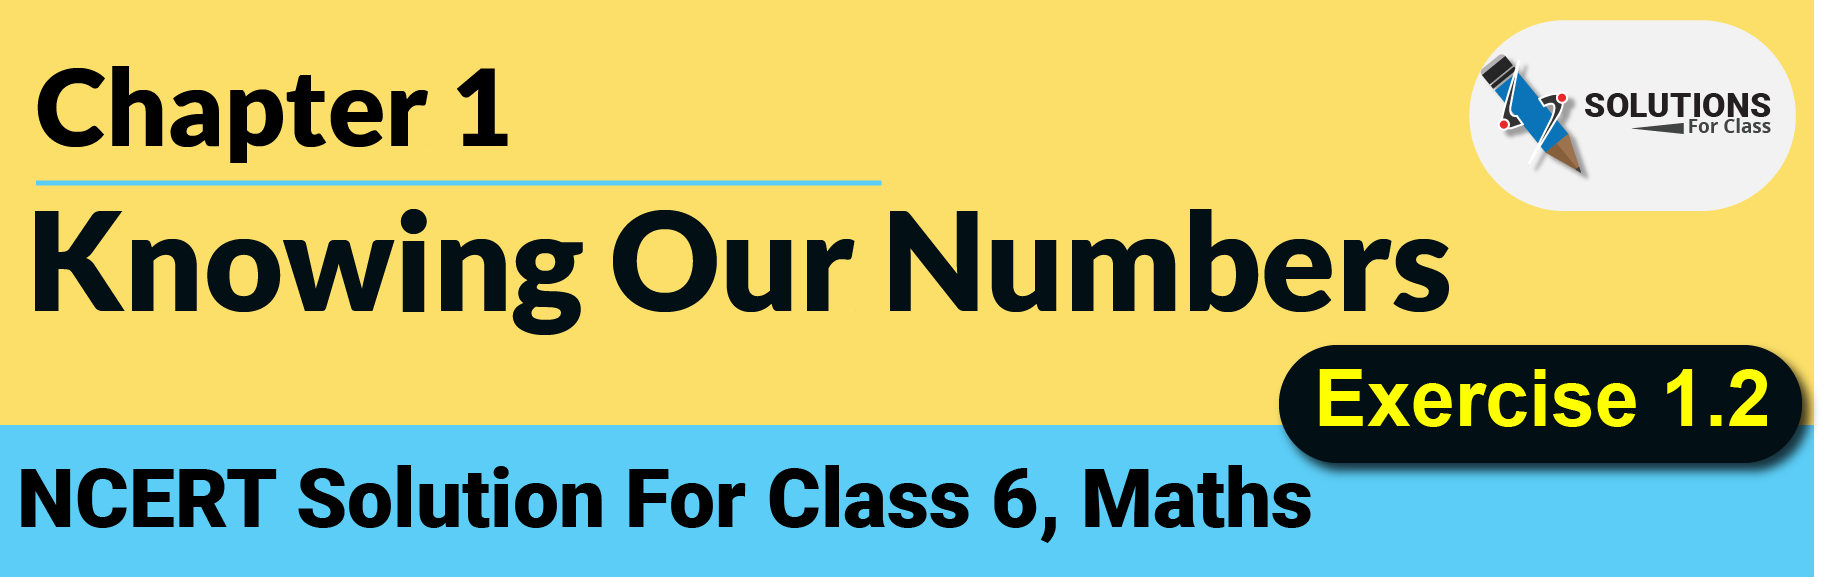 NCERT Solution For Class 6, Maths, Chapter 1, Knowing Our Numbers, ex 1.2